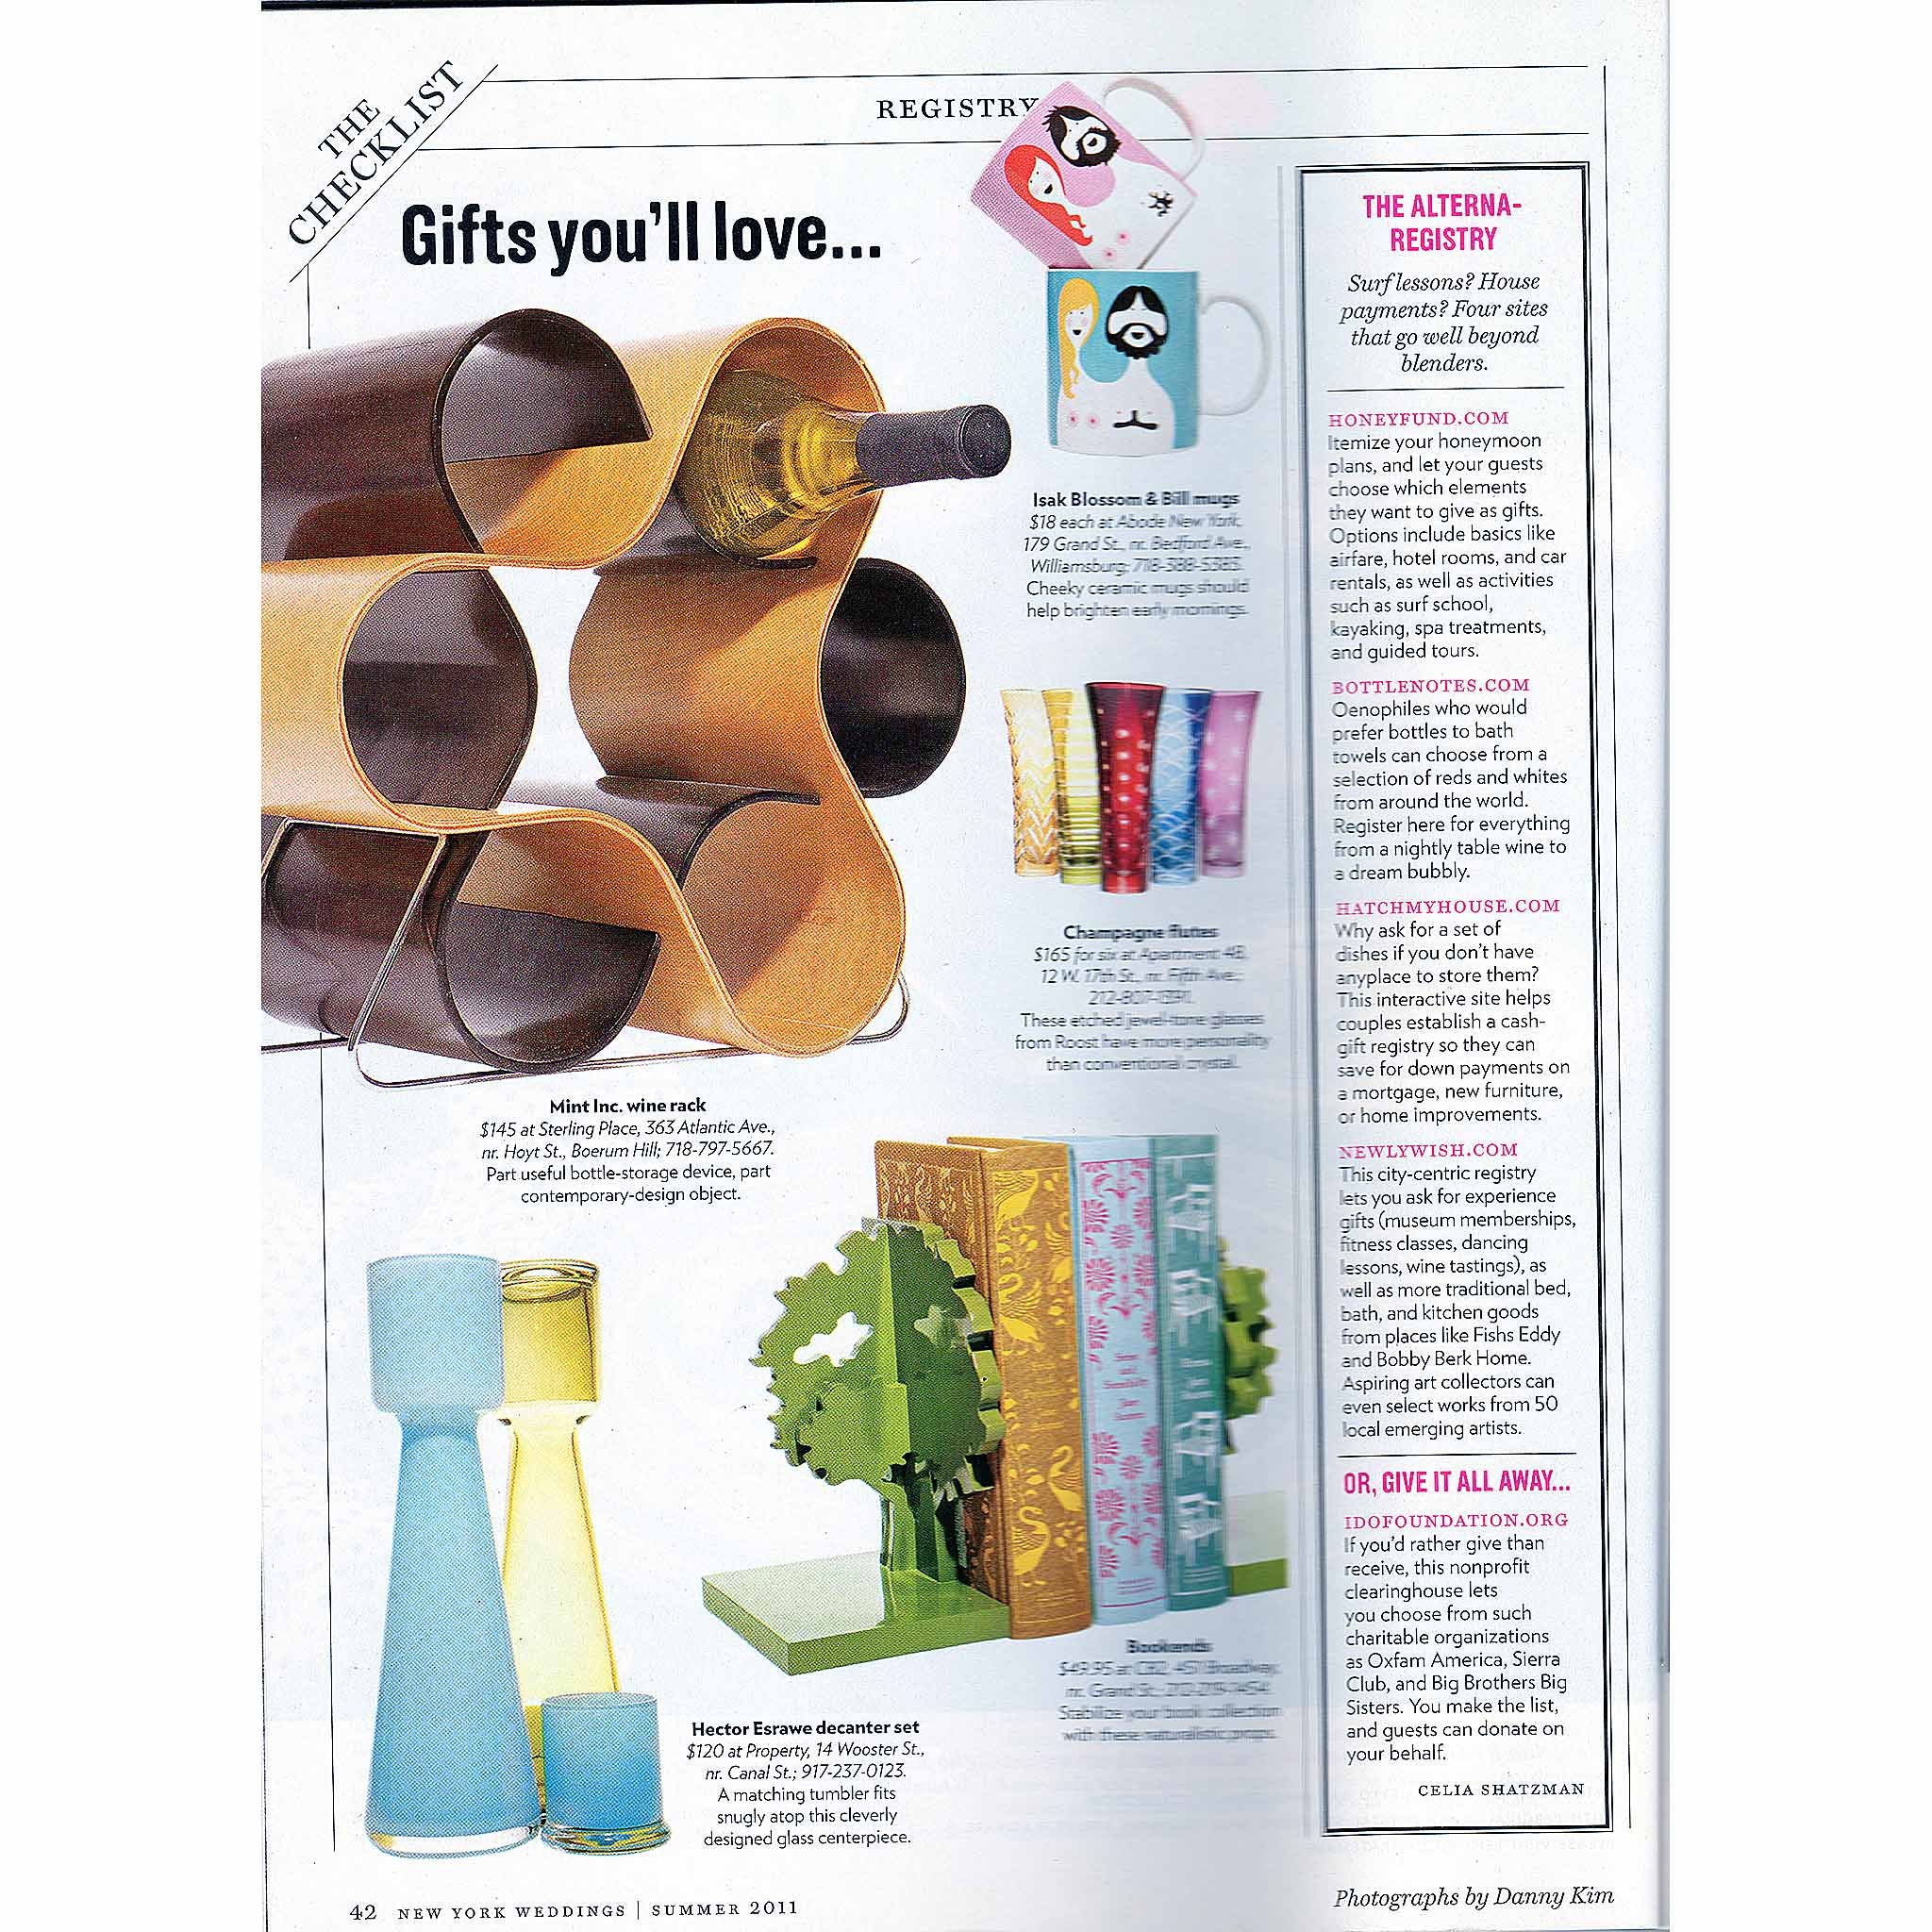 New York Weddings, "The Checklist: Gifts You'll Love - ISAK Co. UK's Blossom & Bill mugs," Summer 2011, page 42.